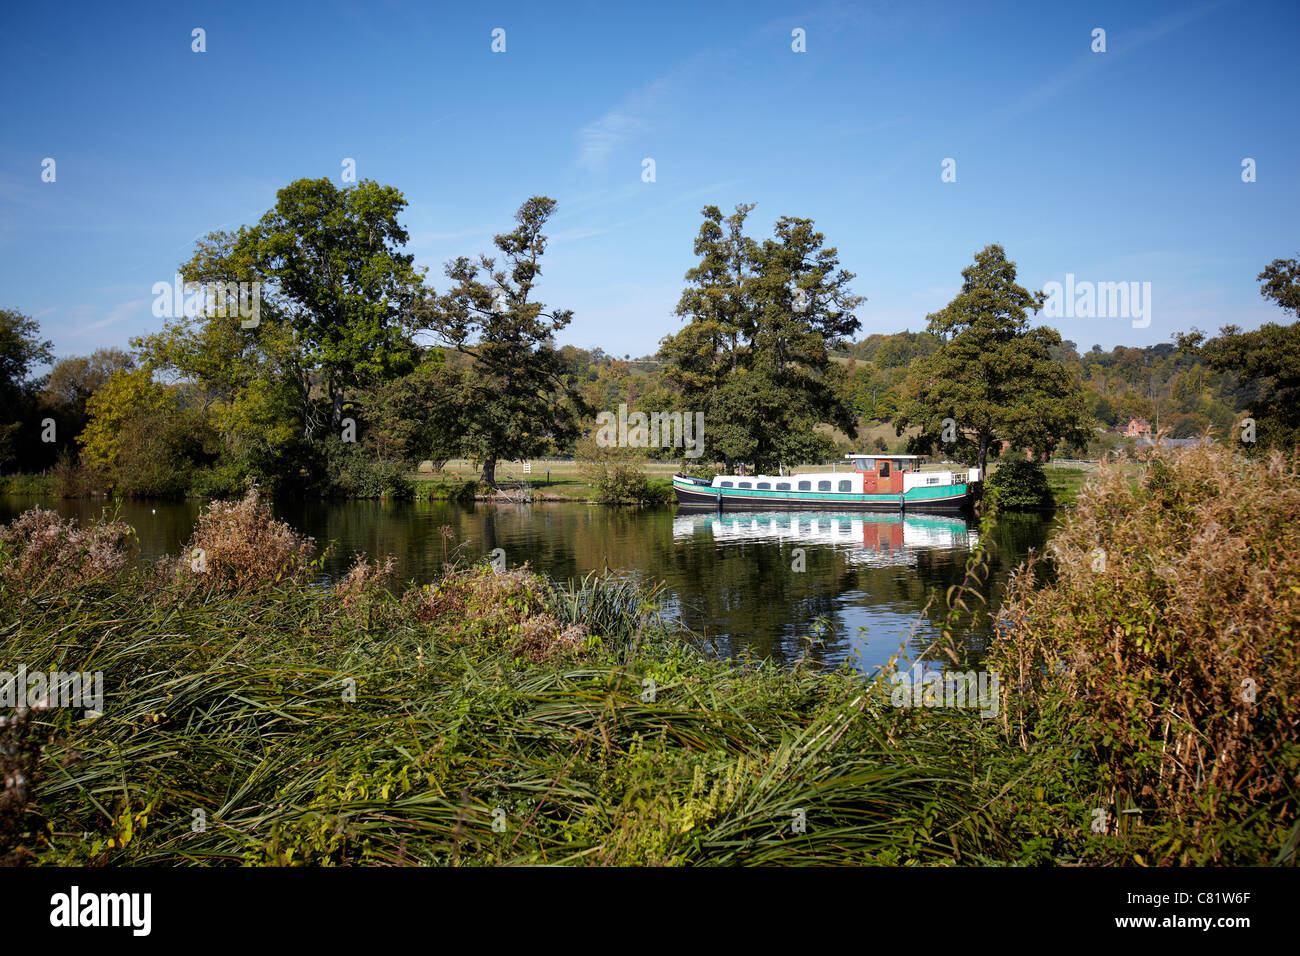 The barge Morgenster moored alongside the River Thames near to Pangbourne, Reading, Berkshire. Stock Photo